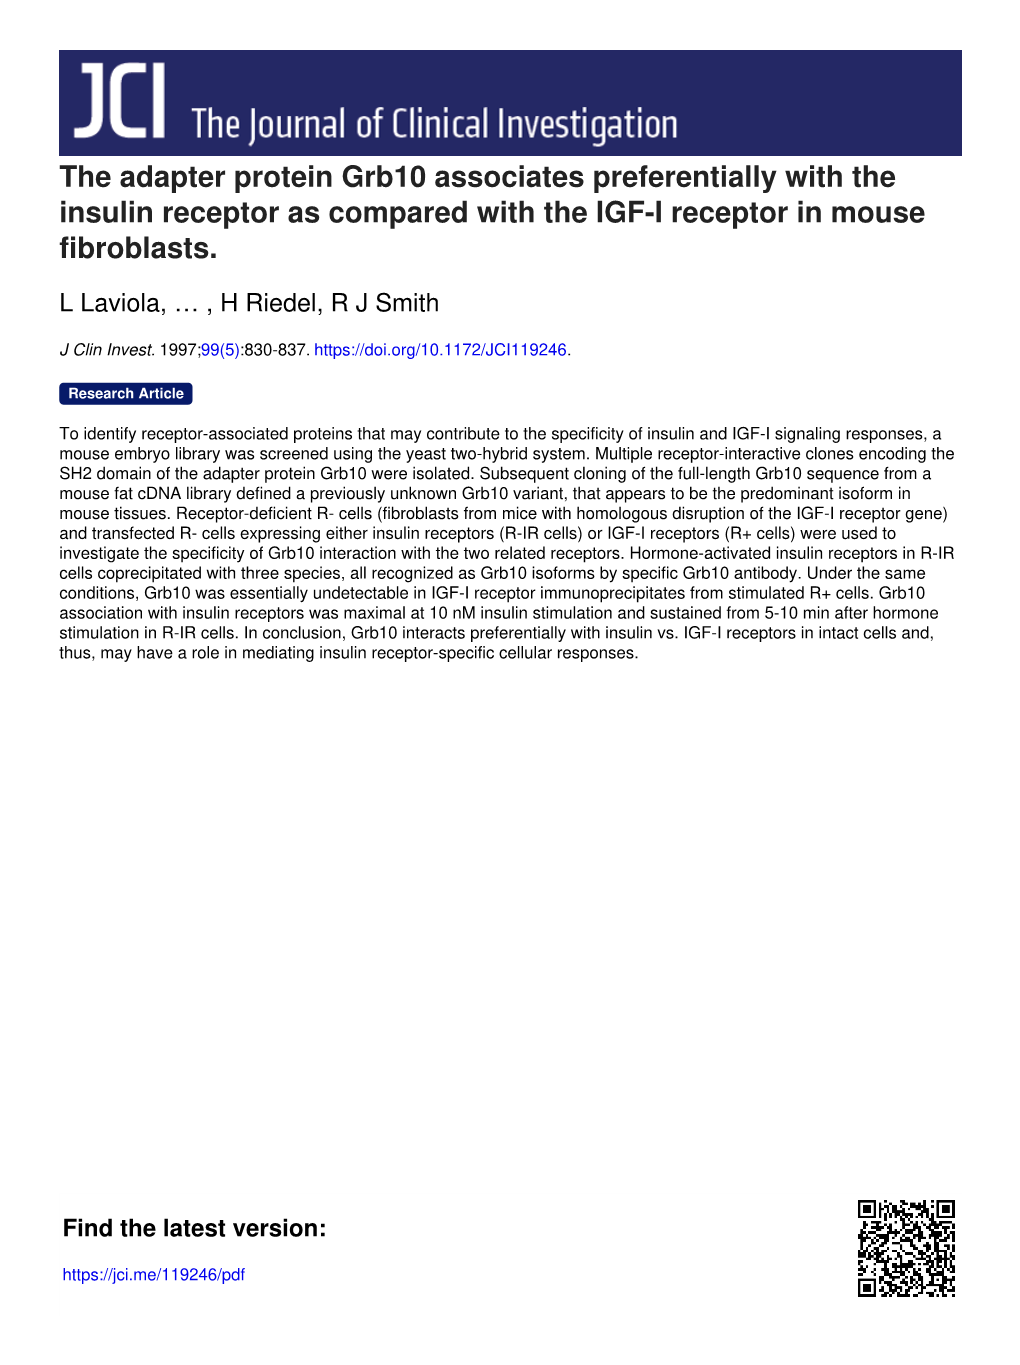 The Adapter Protein Grb10 Associates Preferentially with the Insulin Receptor As Compared with the IGF-I Receptor in Mouse Fibroblasts